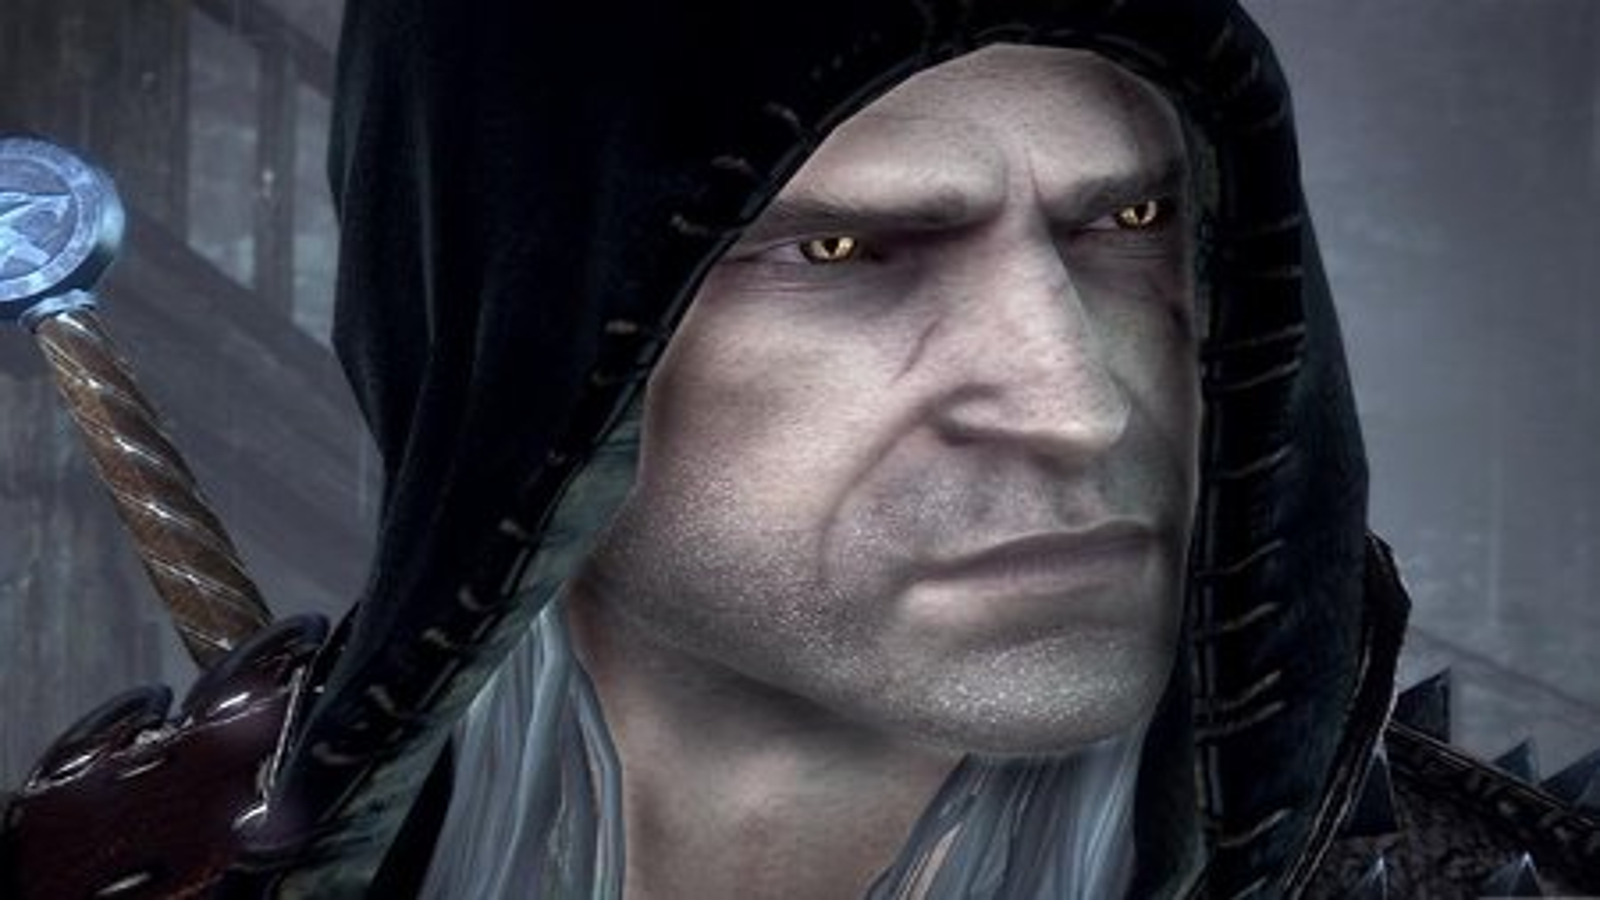 The Witcher 2: Assassins of Kings Enhanced Edition Soundtrack on Steam